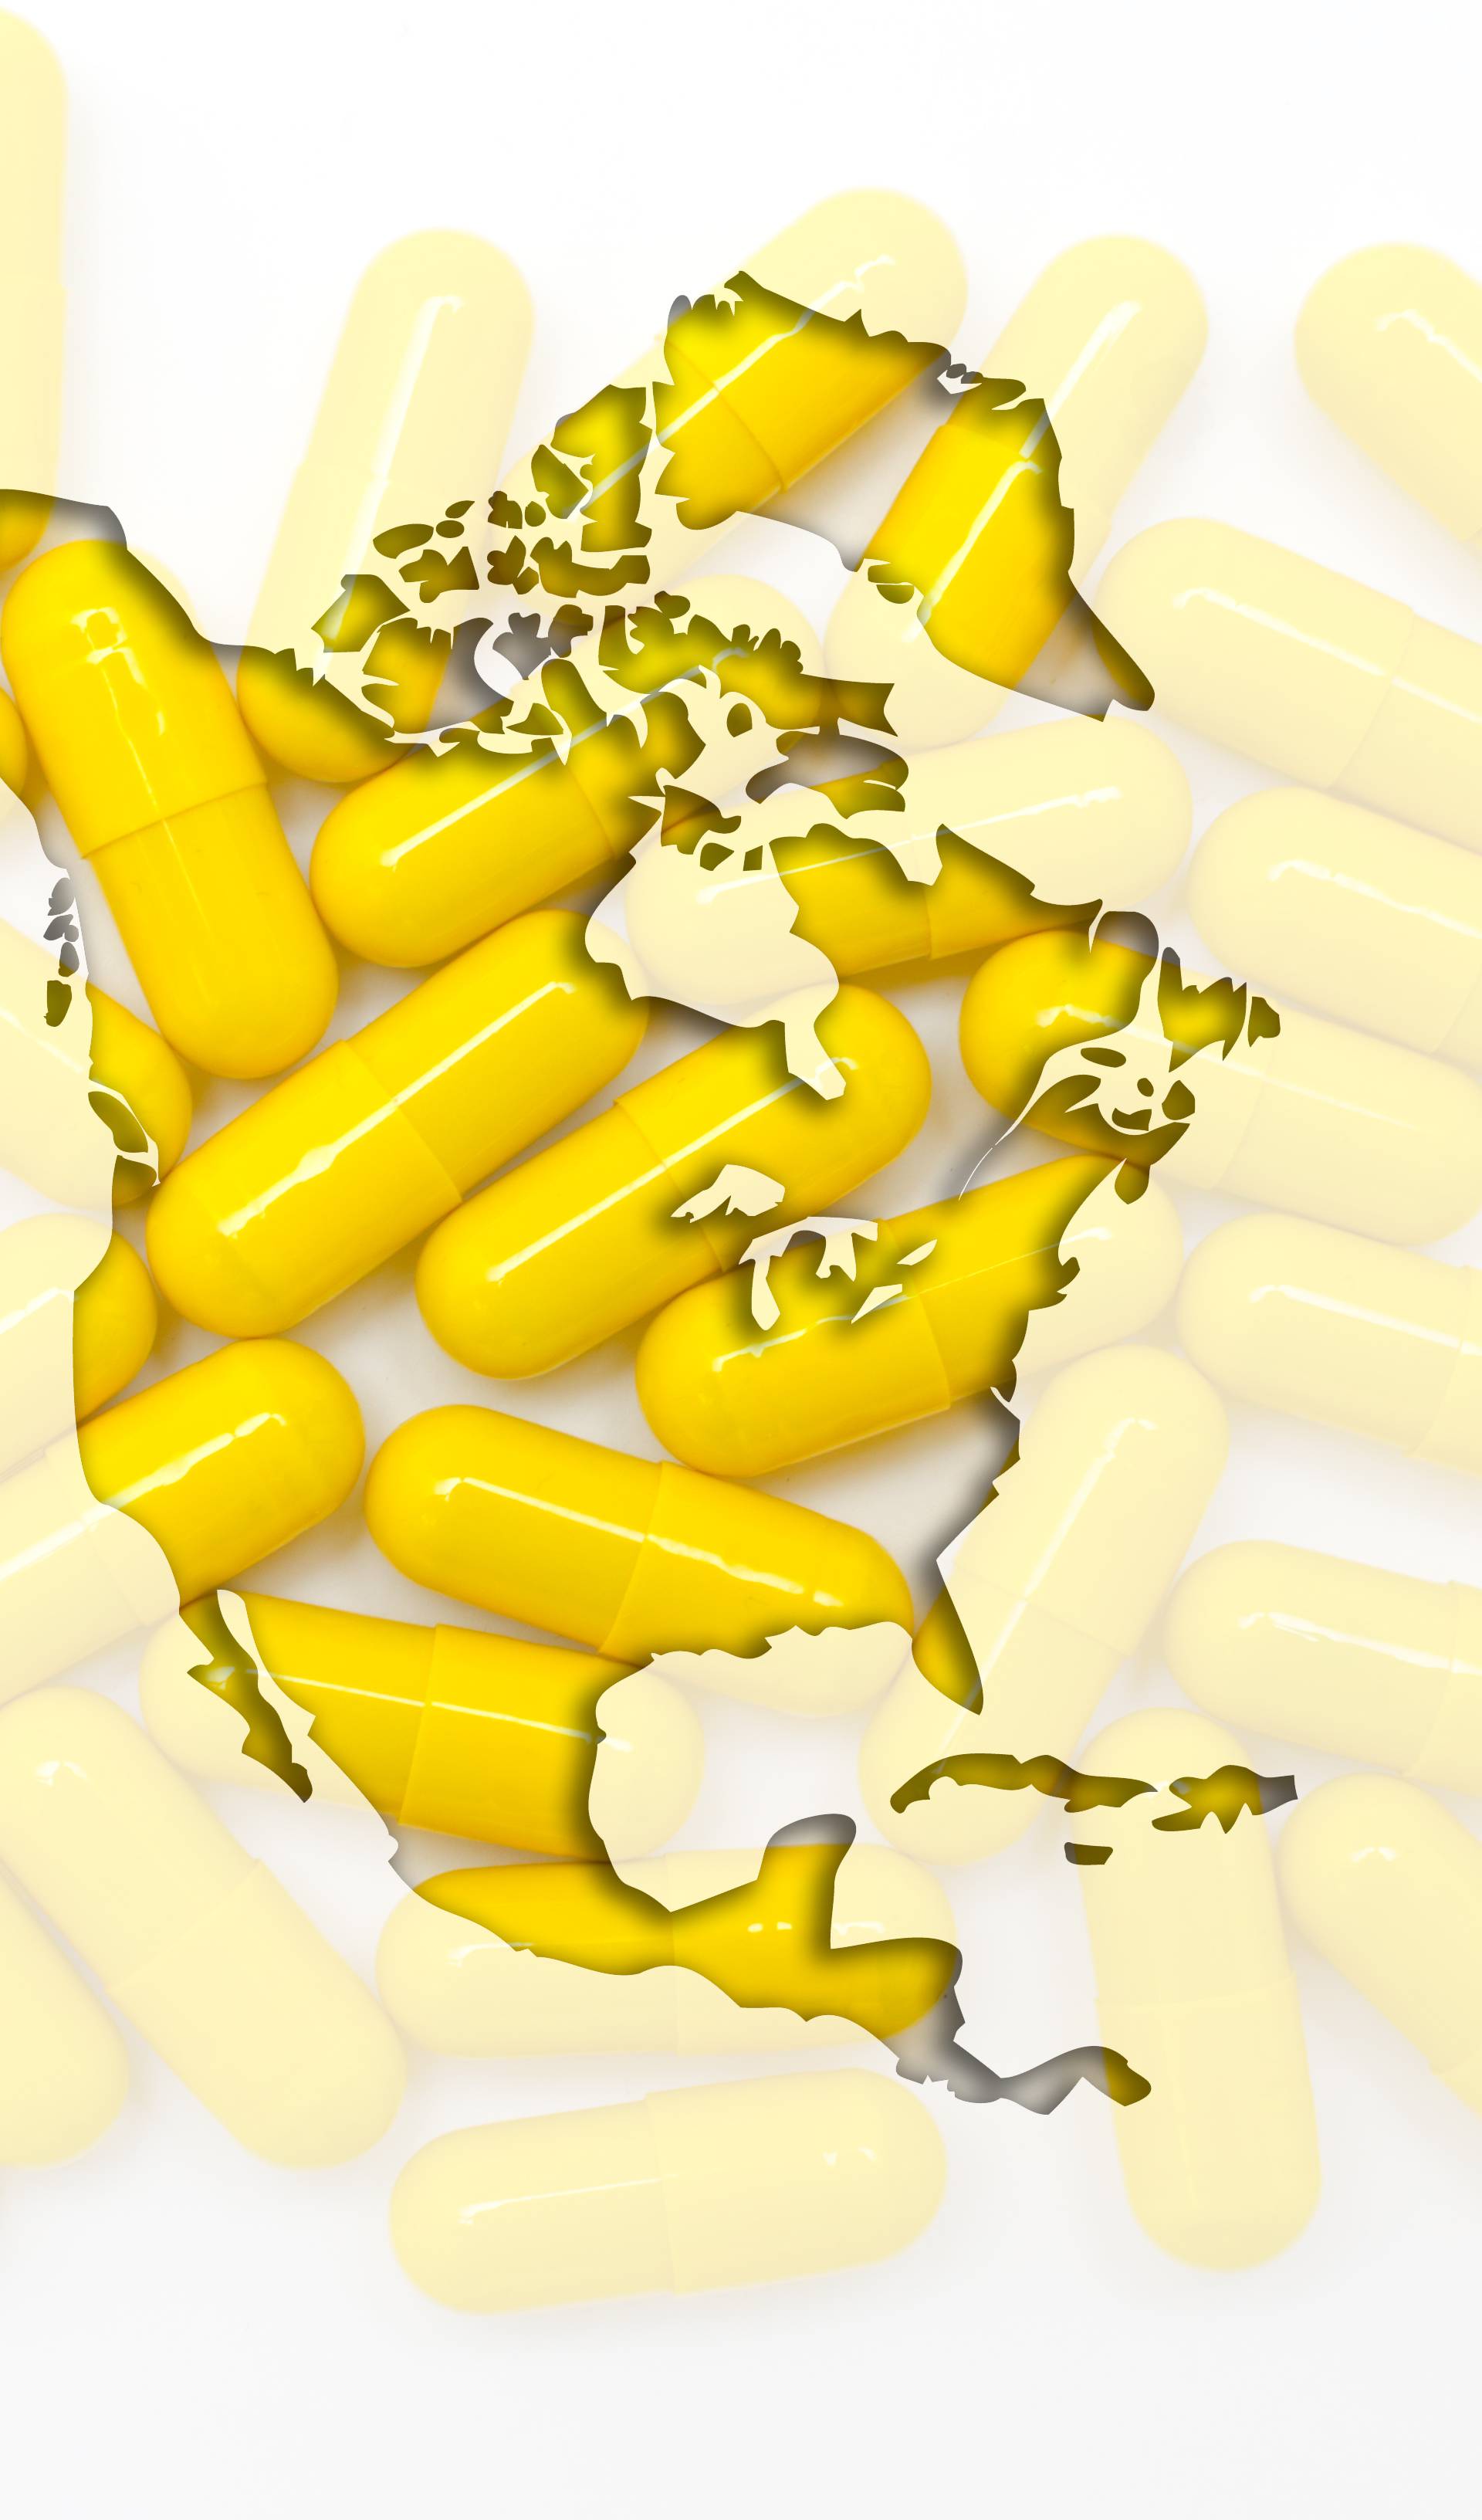 Outline map of north america with pills in the background for he